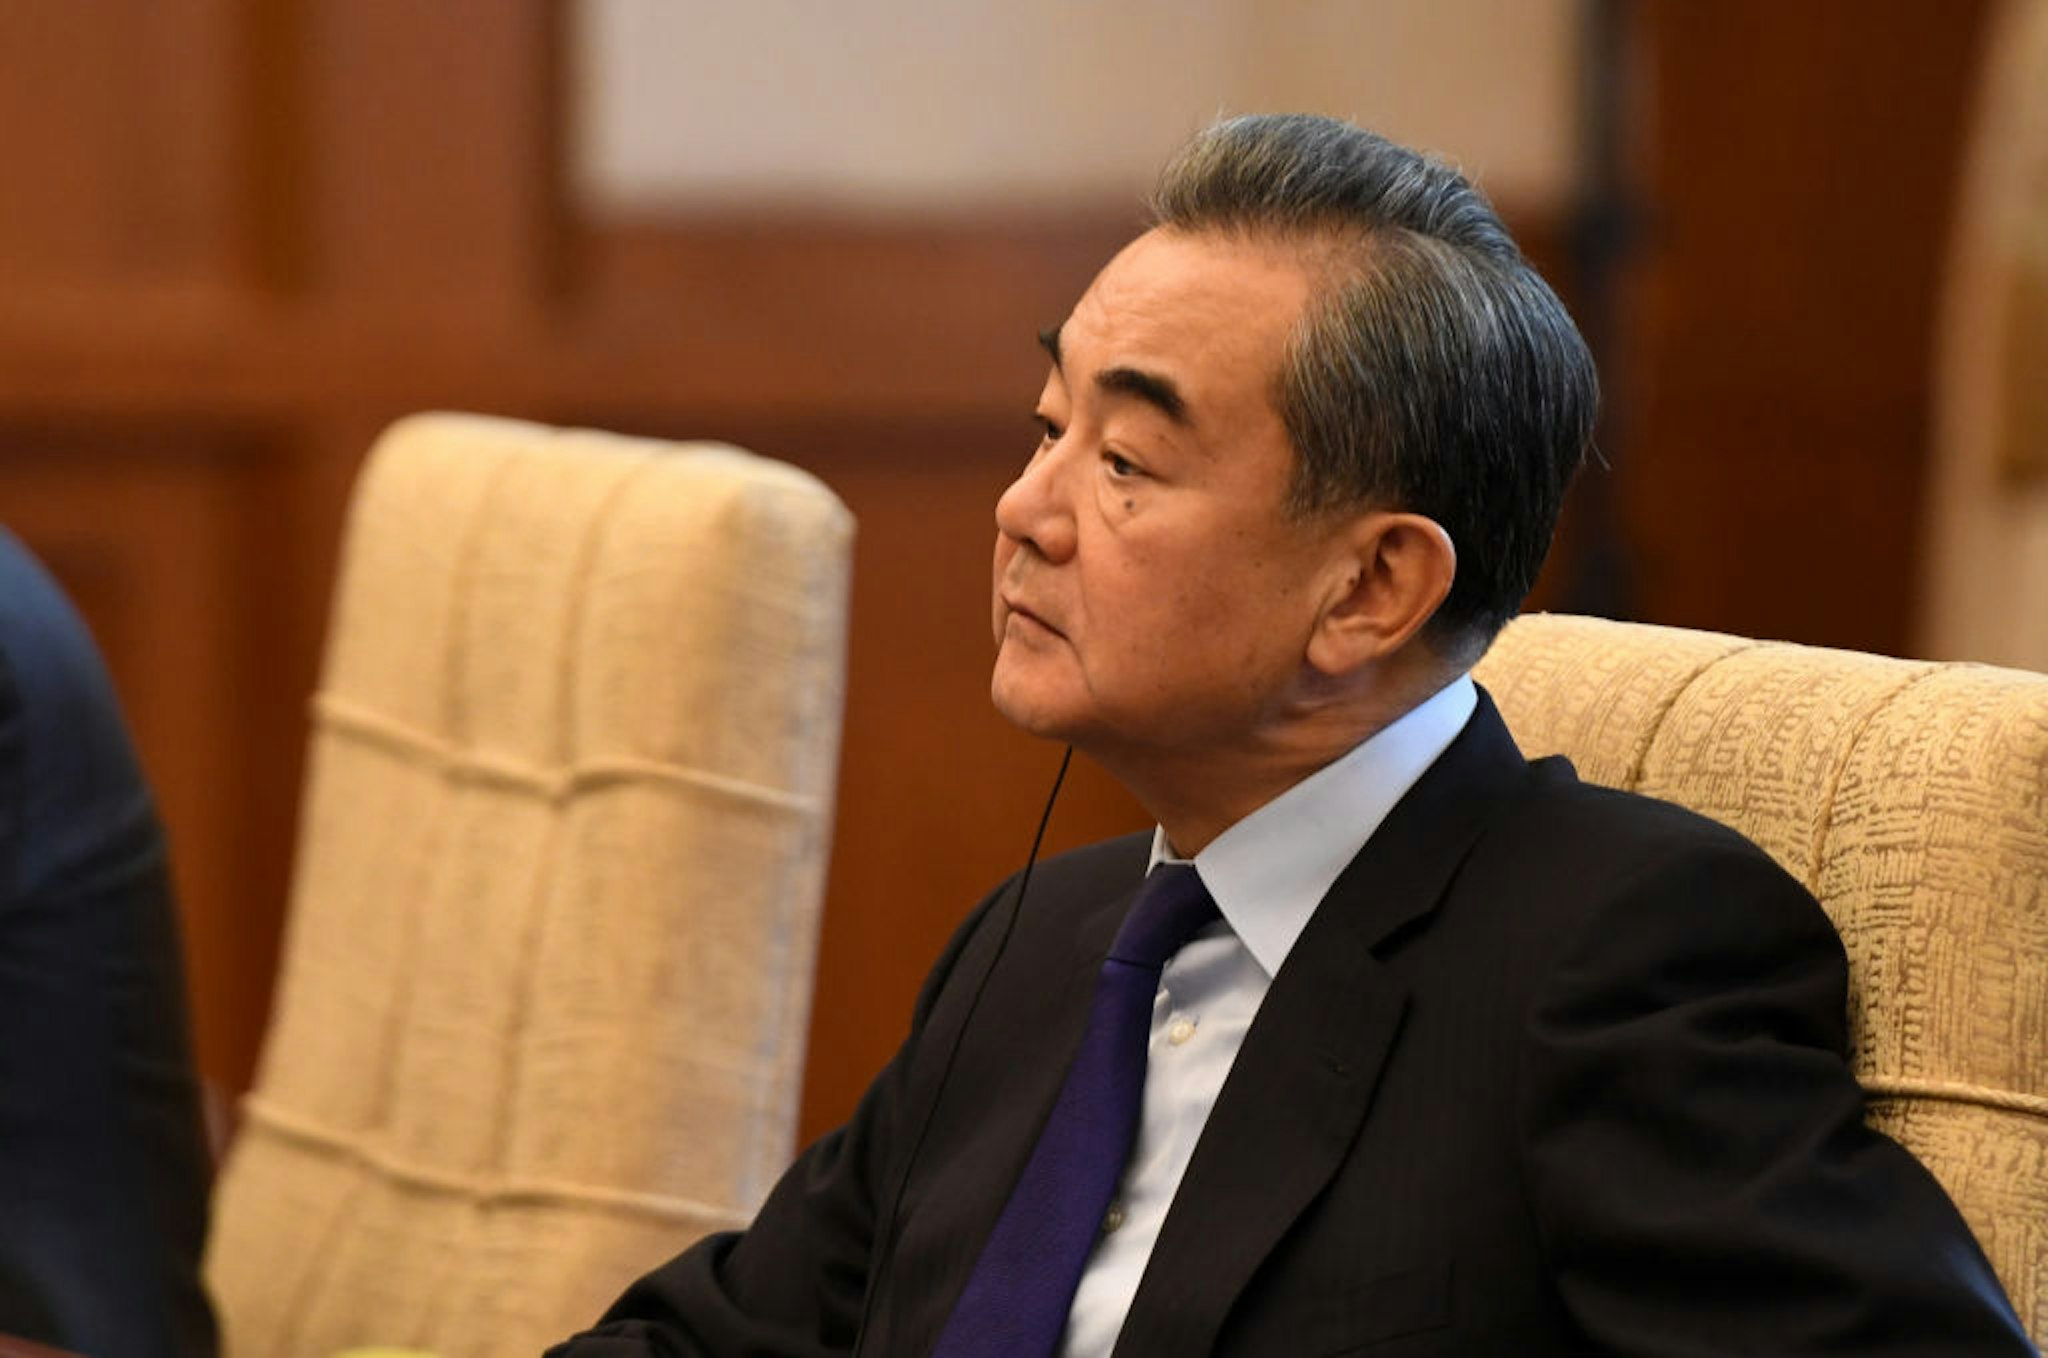 China's Foreign Minister Wang Yi listens to Iran's Foreign Minister Mohammad Javad Zarif (not pictured) during a meeting at the Diaoyutai state guest house on December 31, 2019 in Beijing, China.